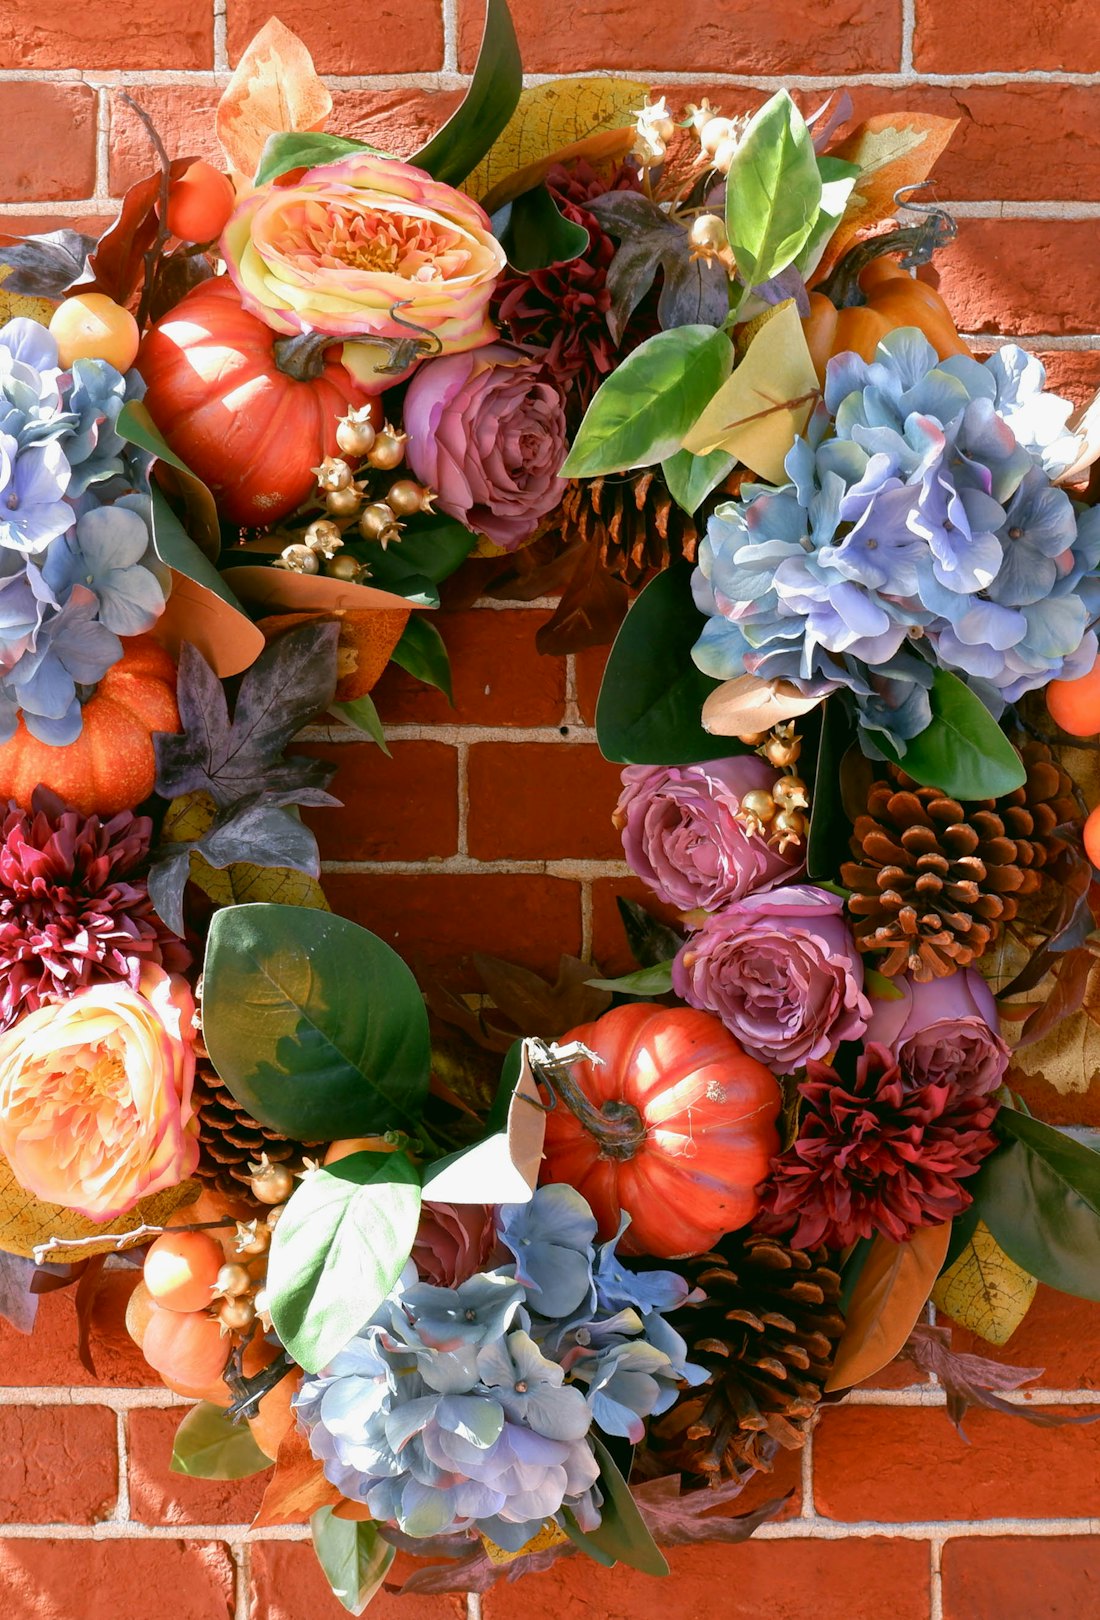 Close-up of a fall wreath on brick wall with blue and purple flowers, pumpkins, and greenery.